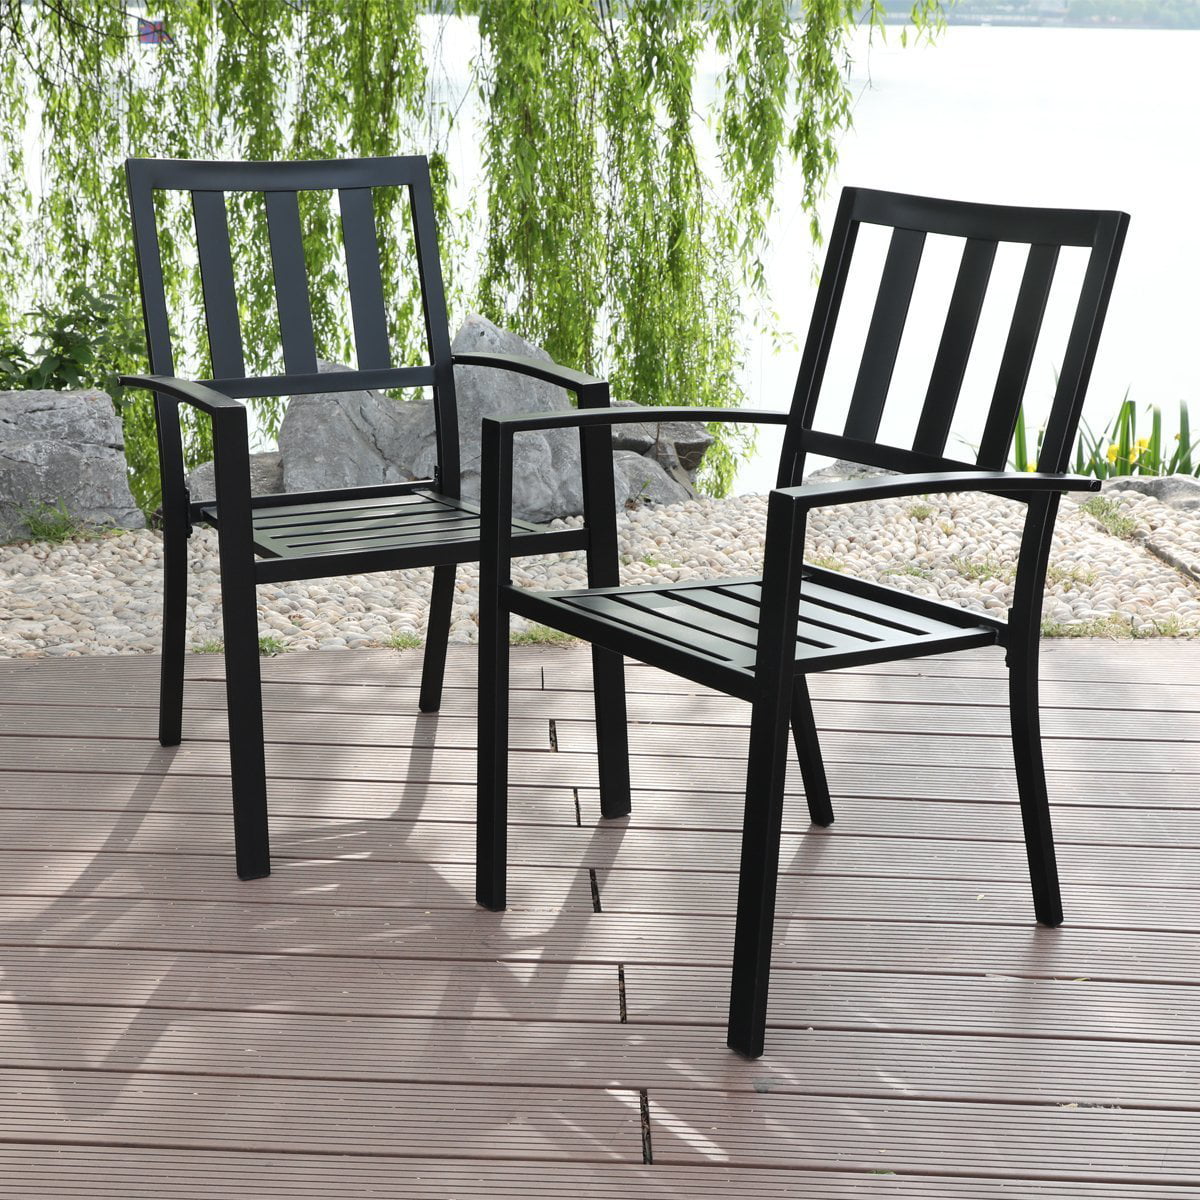 Mf Studio Metal Patio Outdoor Dining, Cool Outdoor Dining Chairs